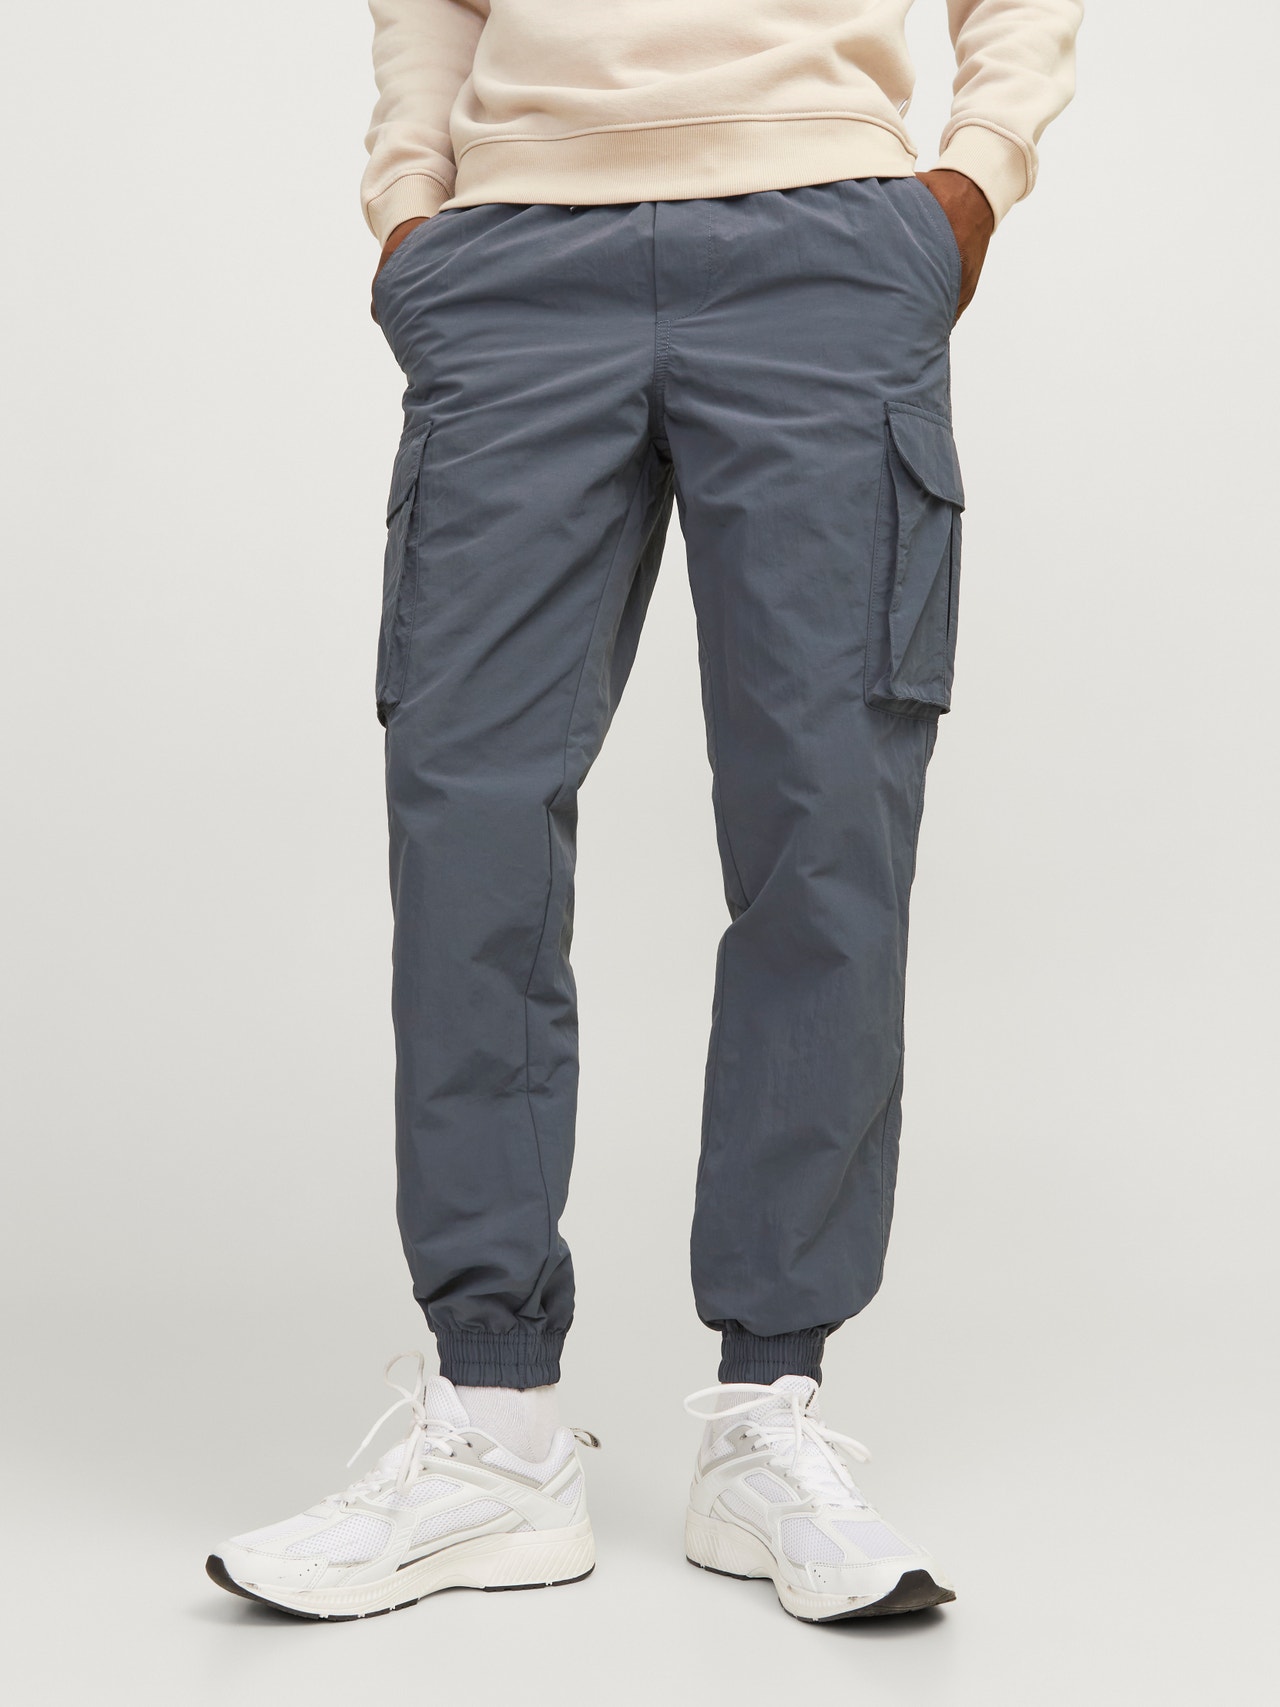 Jack & Jones Relaxed Fit Cargo trousers -India Ink - 12258337